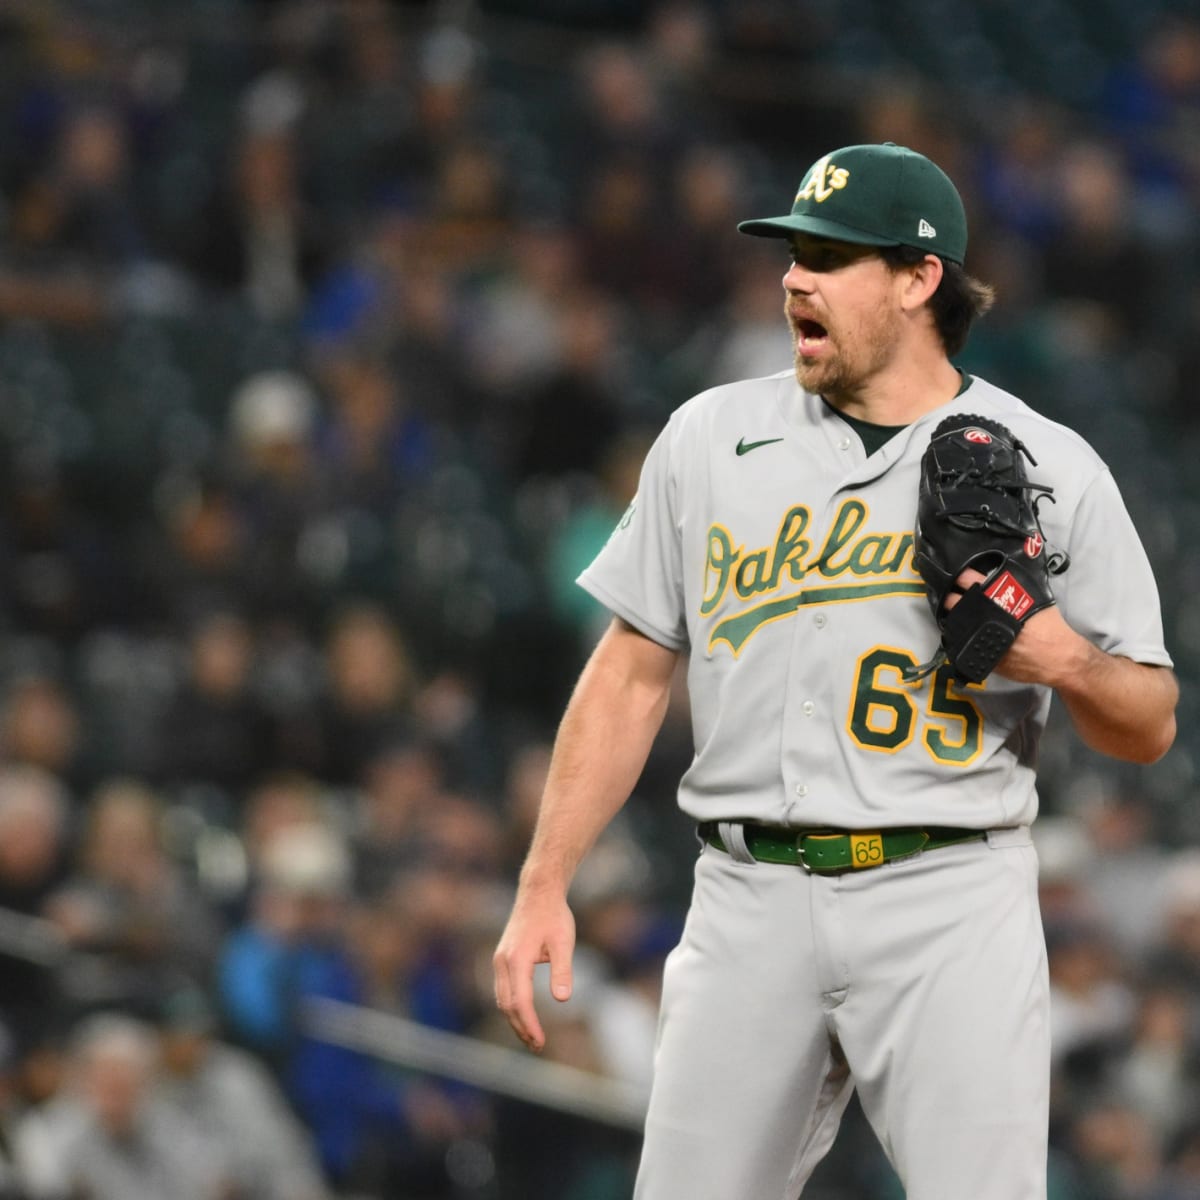 A's close in on franchise lowlight, nearing Oakland loss record of 108